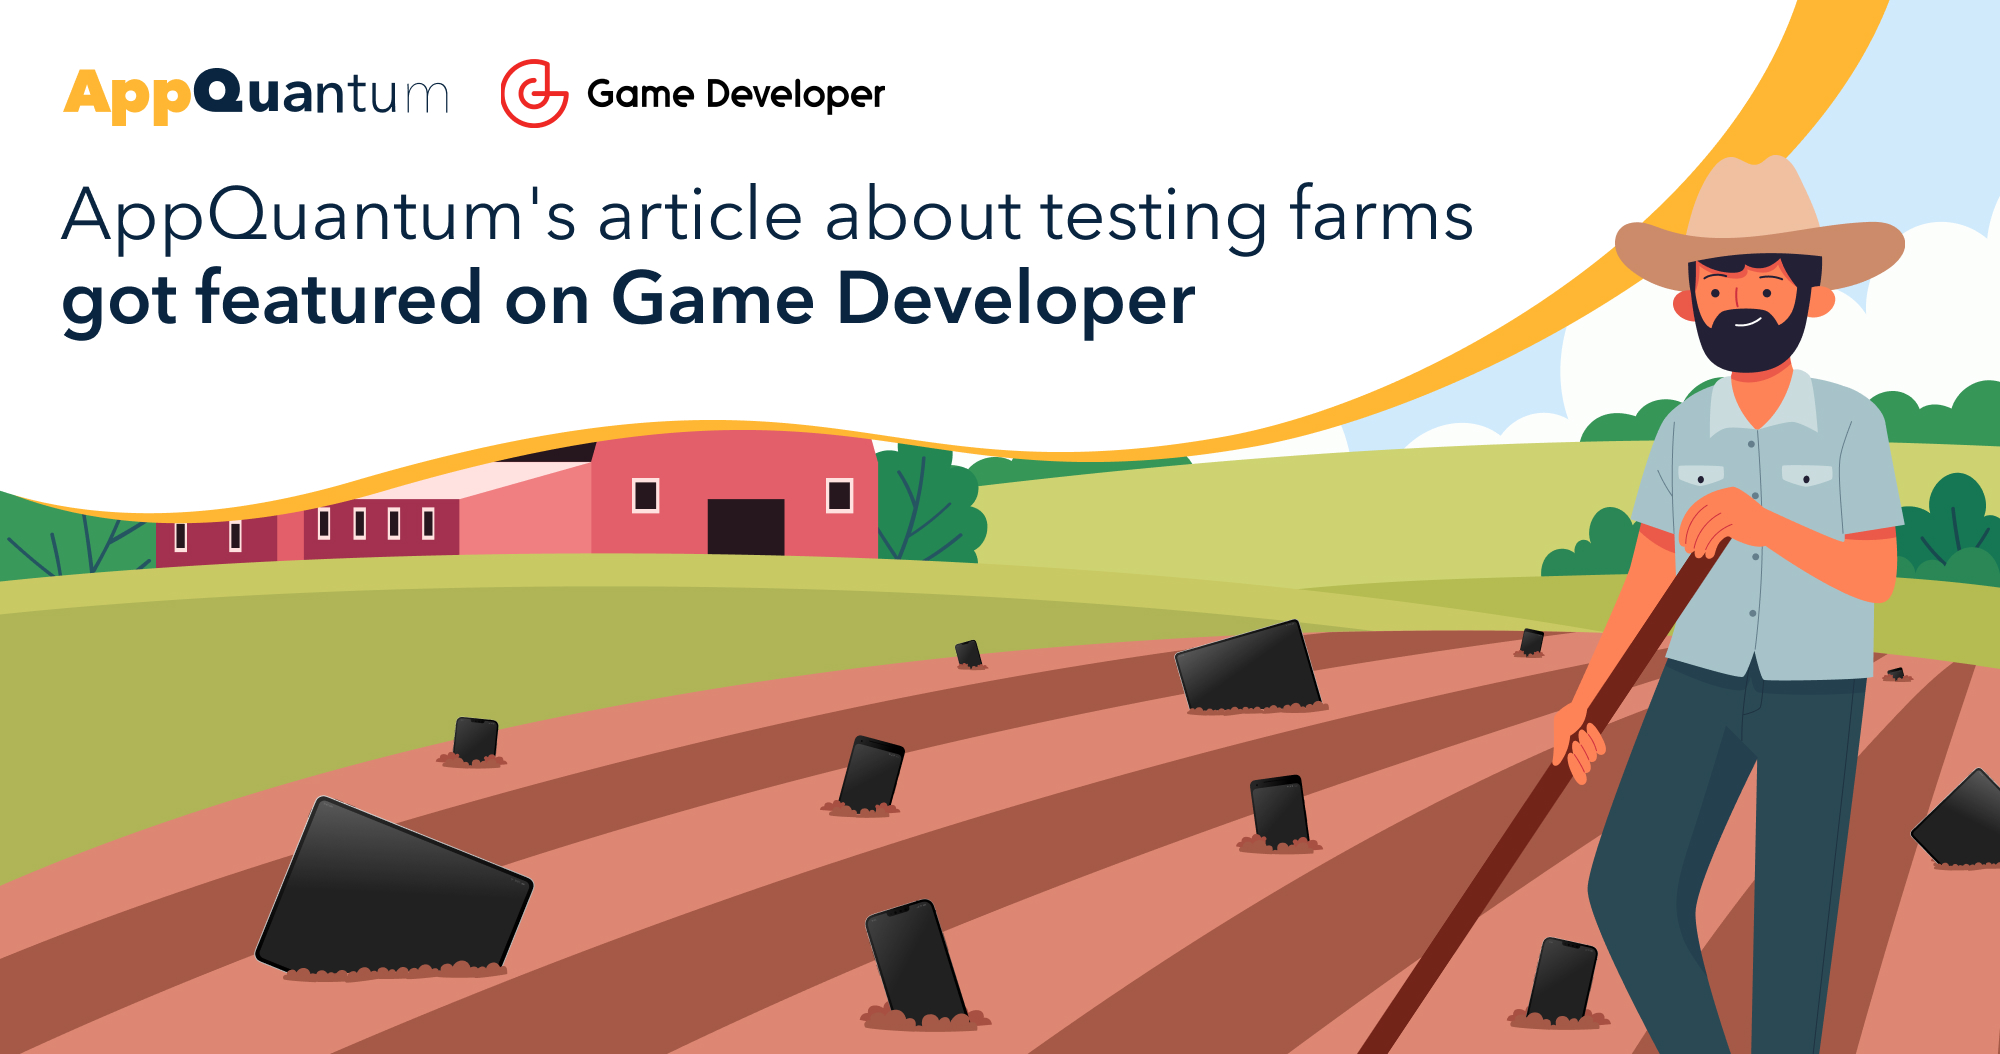 AppQuantum's Article About Testing Farms Got Featured on Game Developer